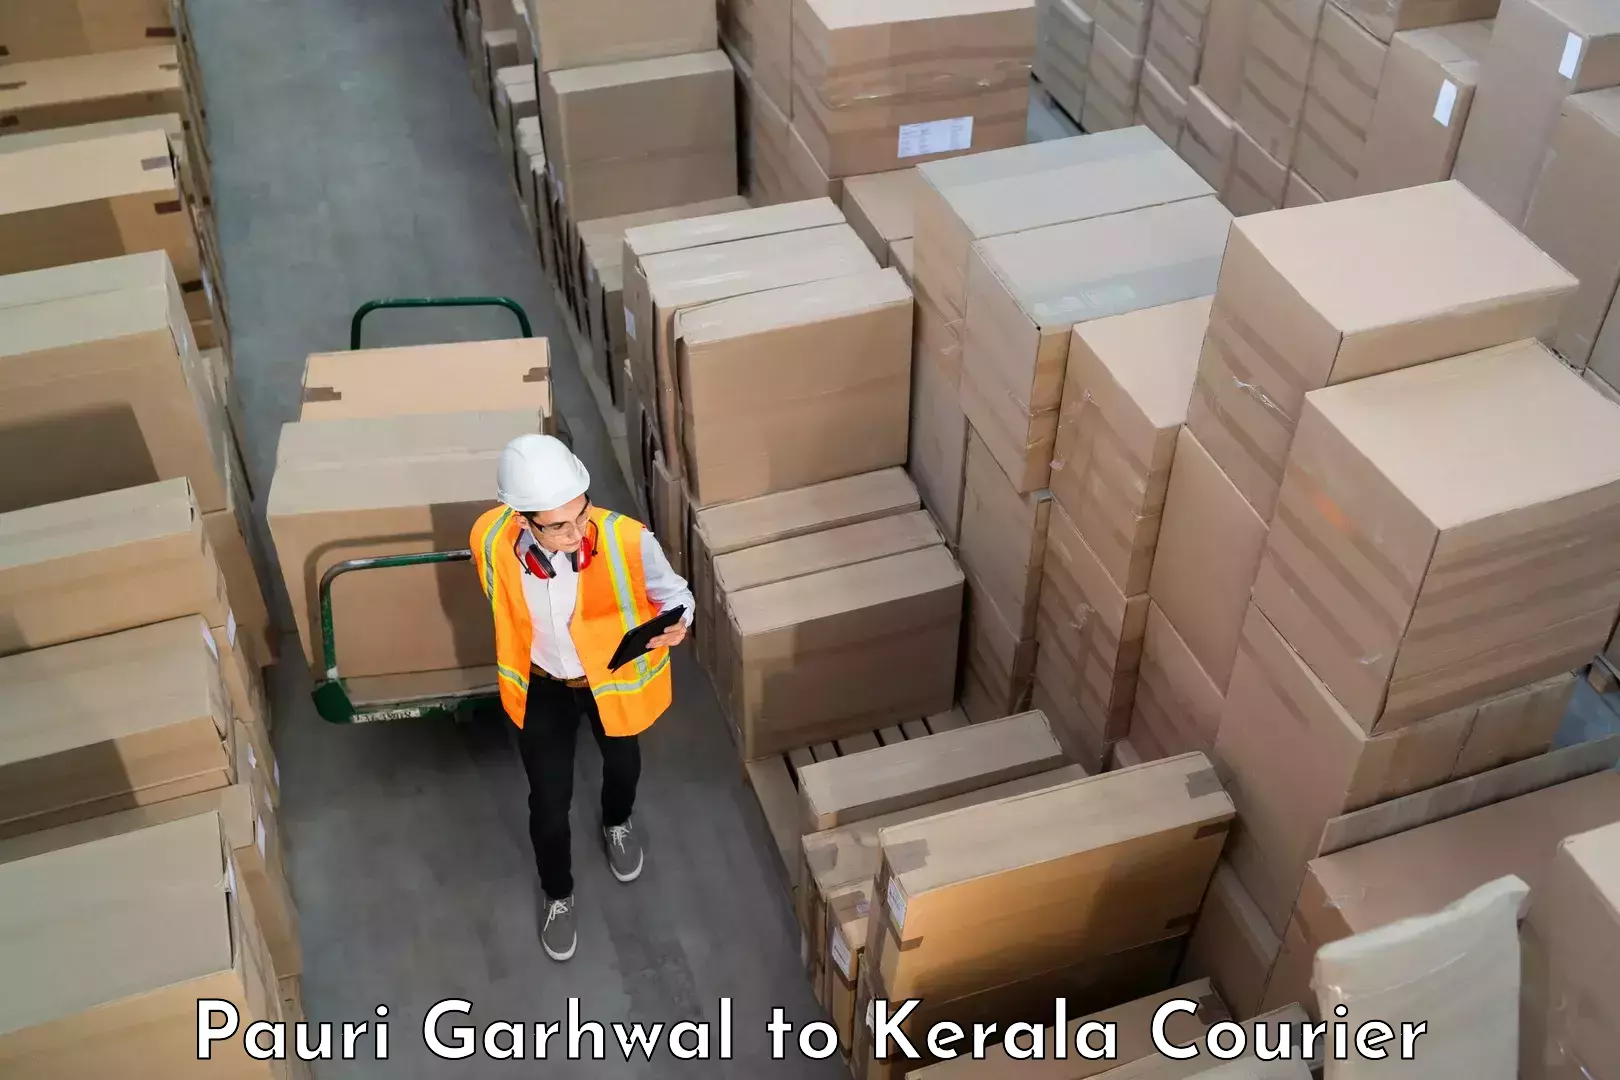 Luggage delivery app Pauri Garhwal to Kerala